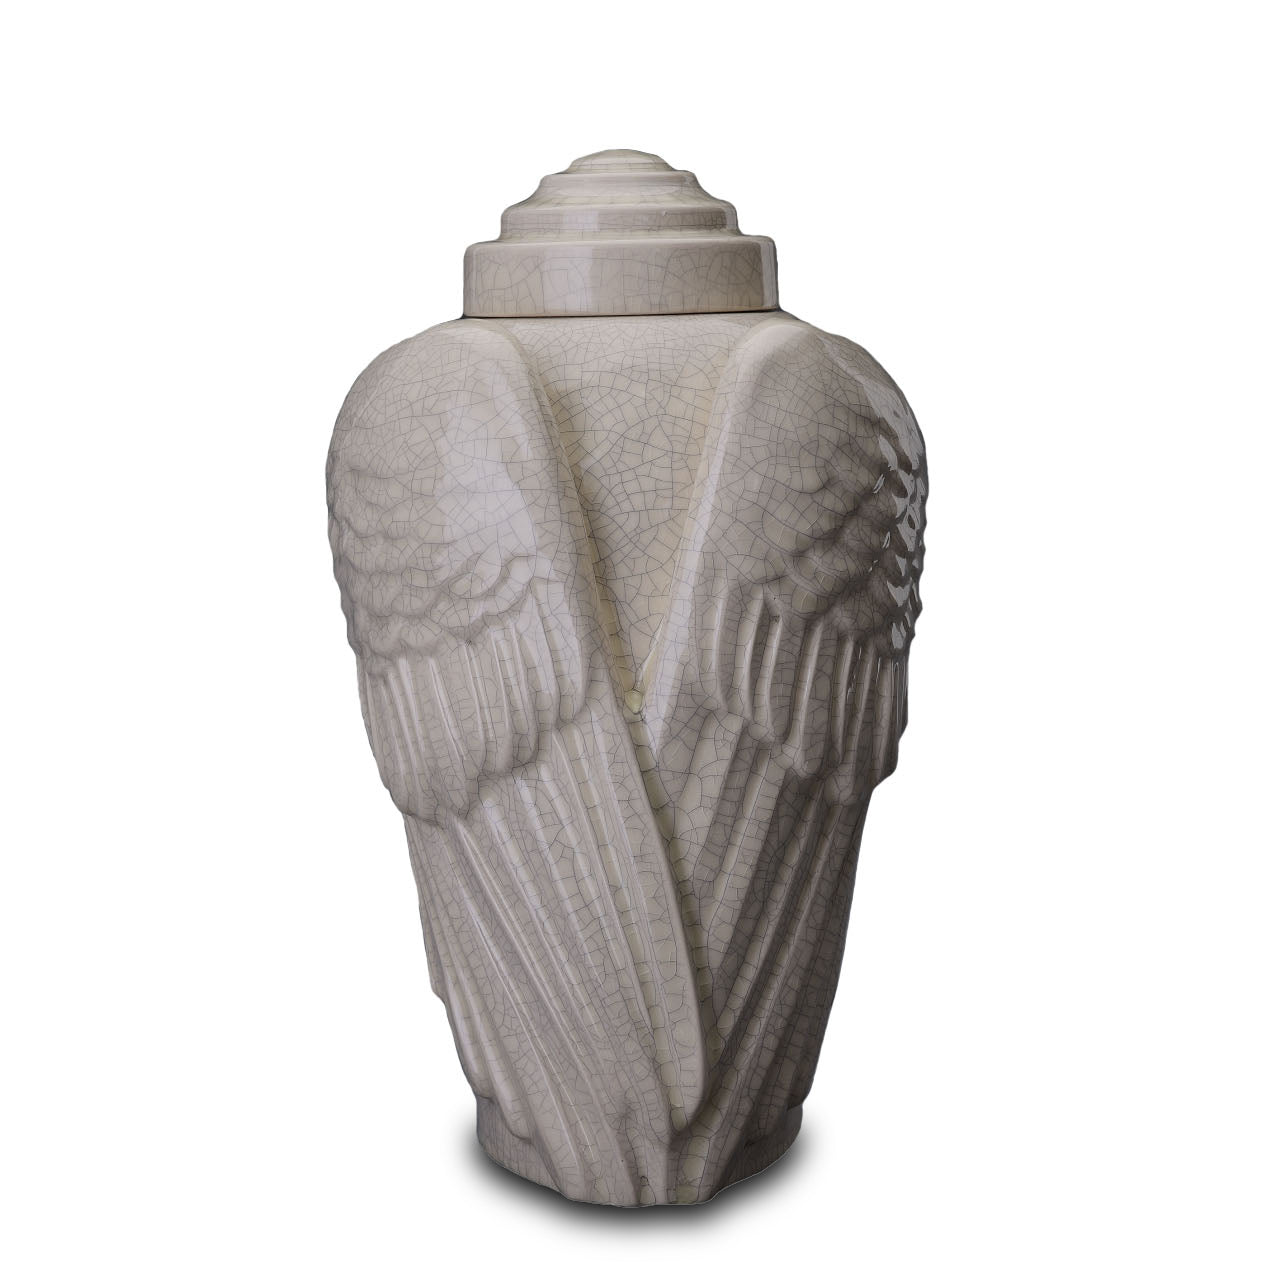 Adult Harmony Wings Cremation Urn for Ashes - Craquelure